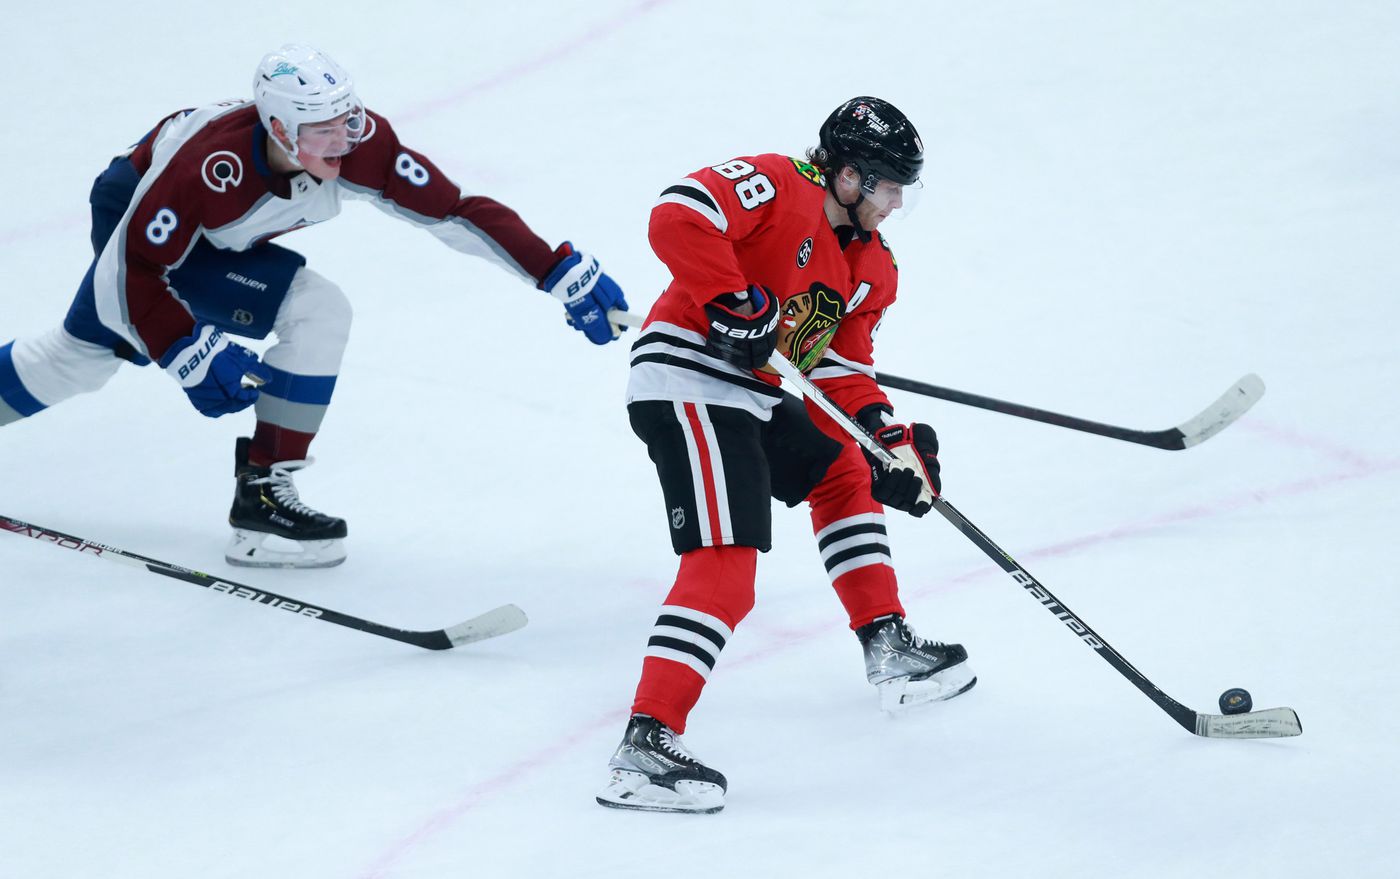 Avalanche defenseman Cale Makar (8) tries to block a shot attempt by Blackhawks right wing Patrick Kane (88) in the second period.